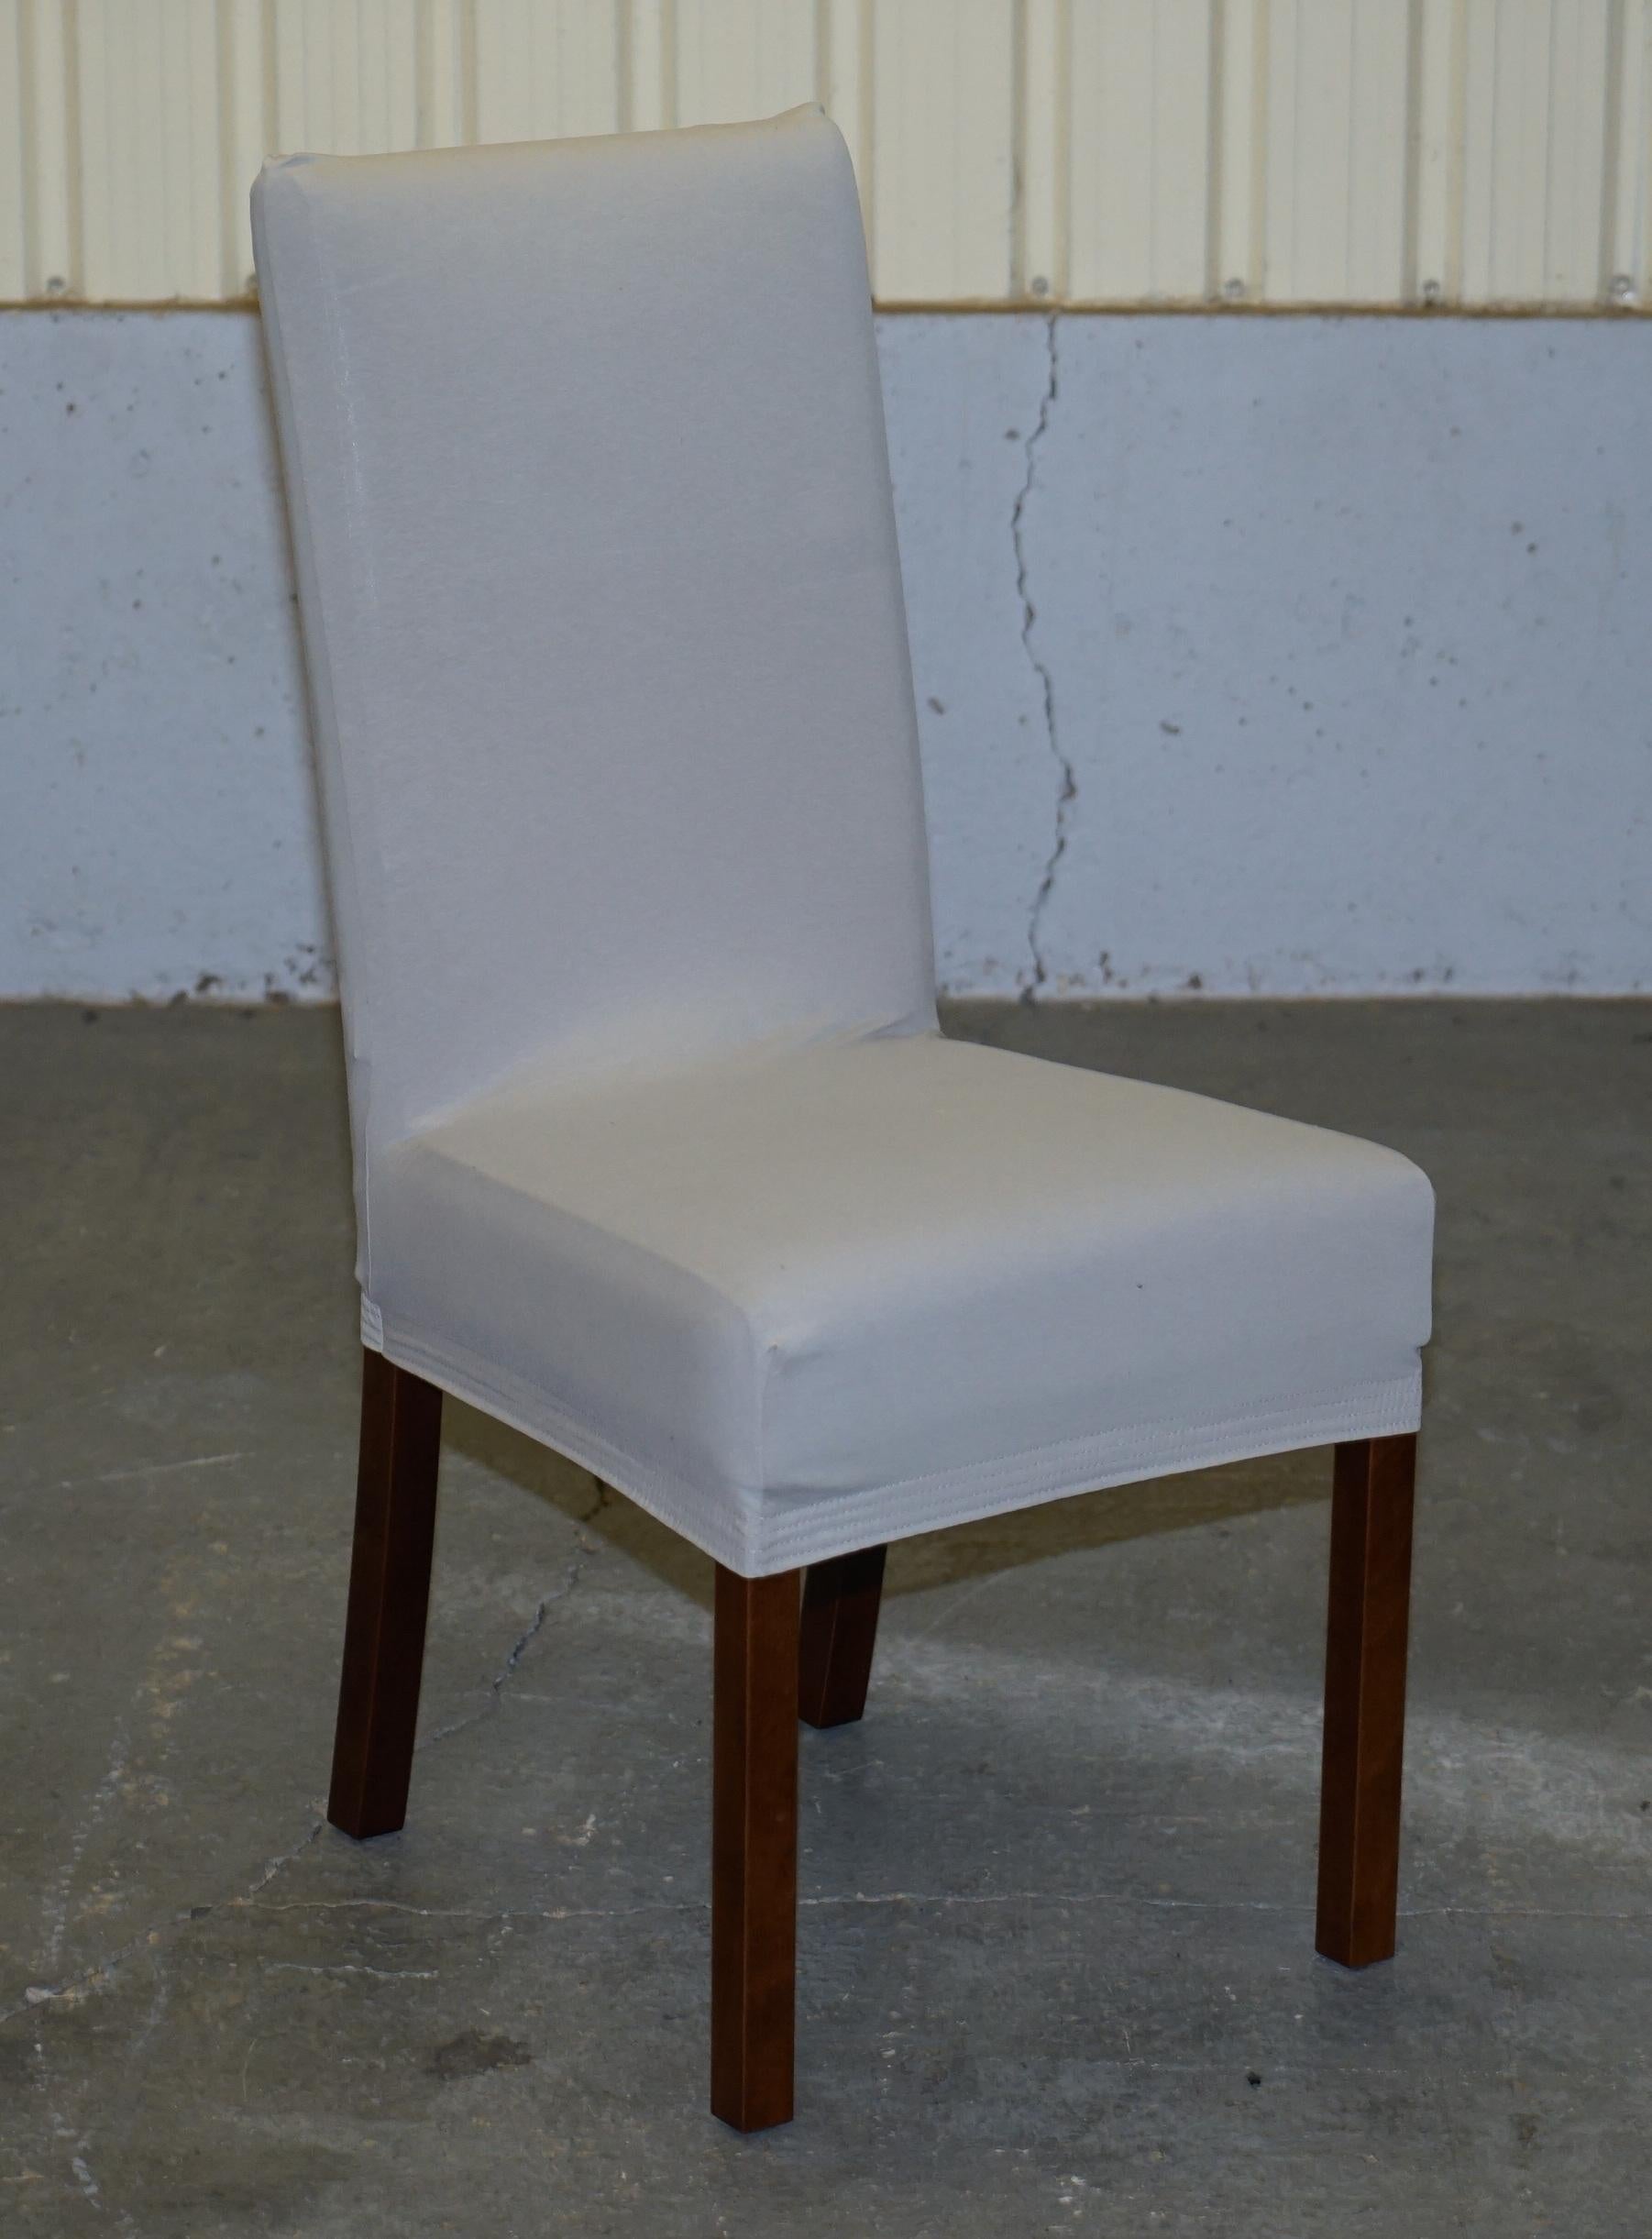 We are delighted to this suite of six bicast leather dining chairs with custom made fabric covers

These a good functional set of chairs, they are comfortable and very contemporary

They upholstery is bicast leather which has the backing of